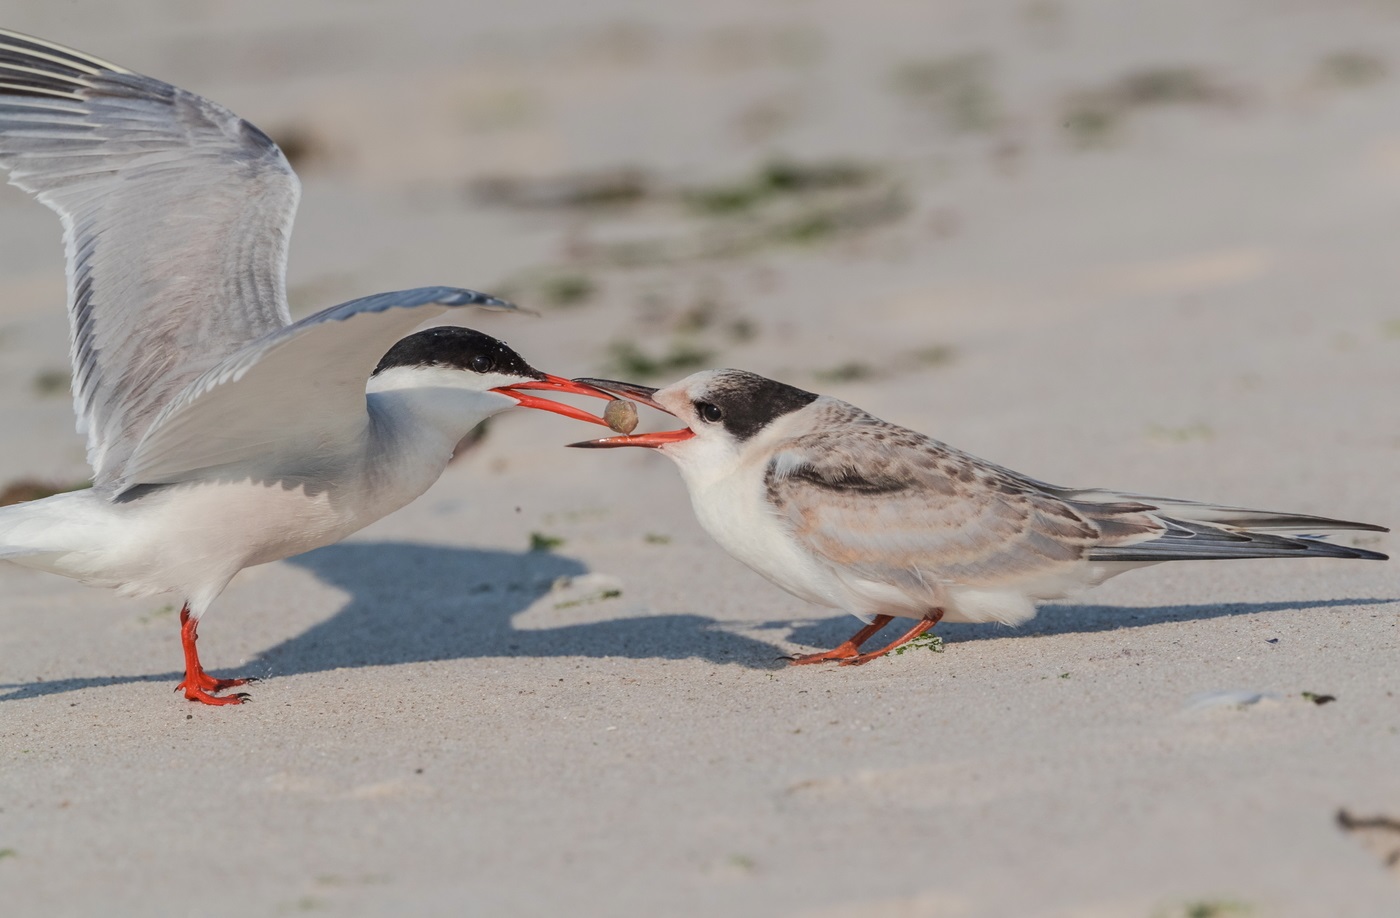 Feeding of almost adult chick near the common tern